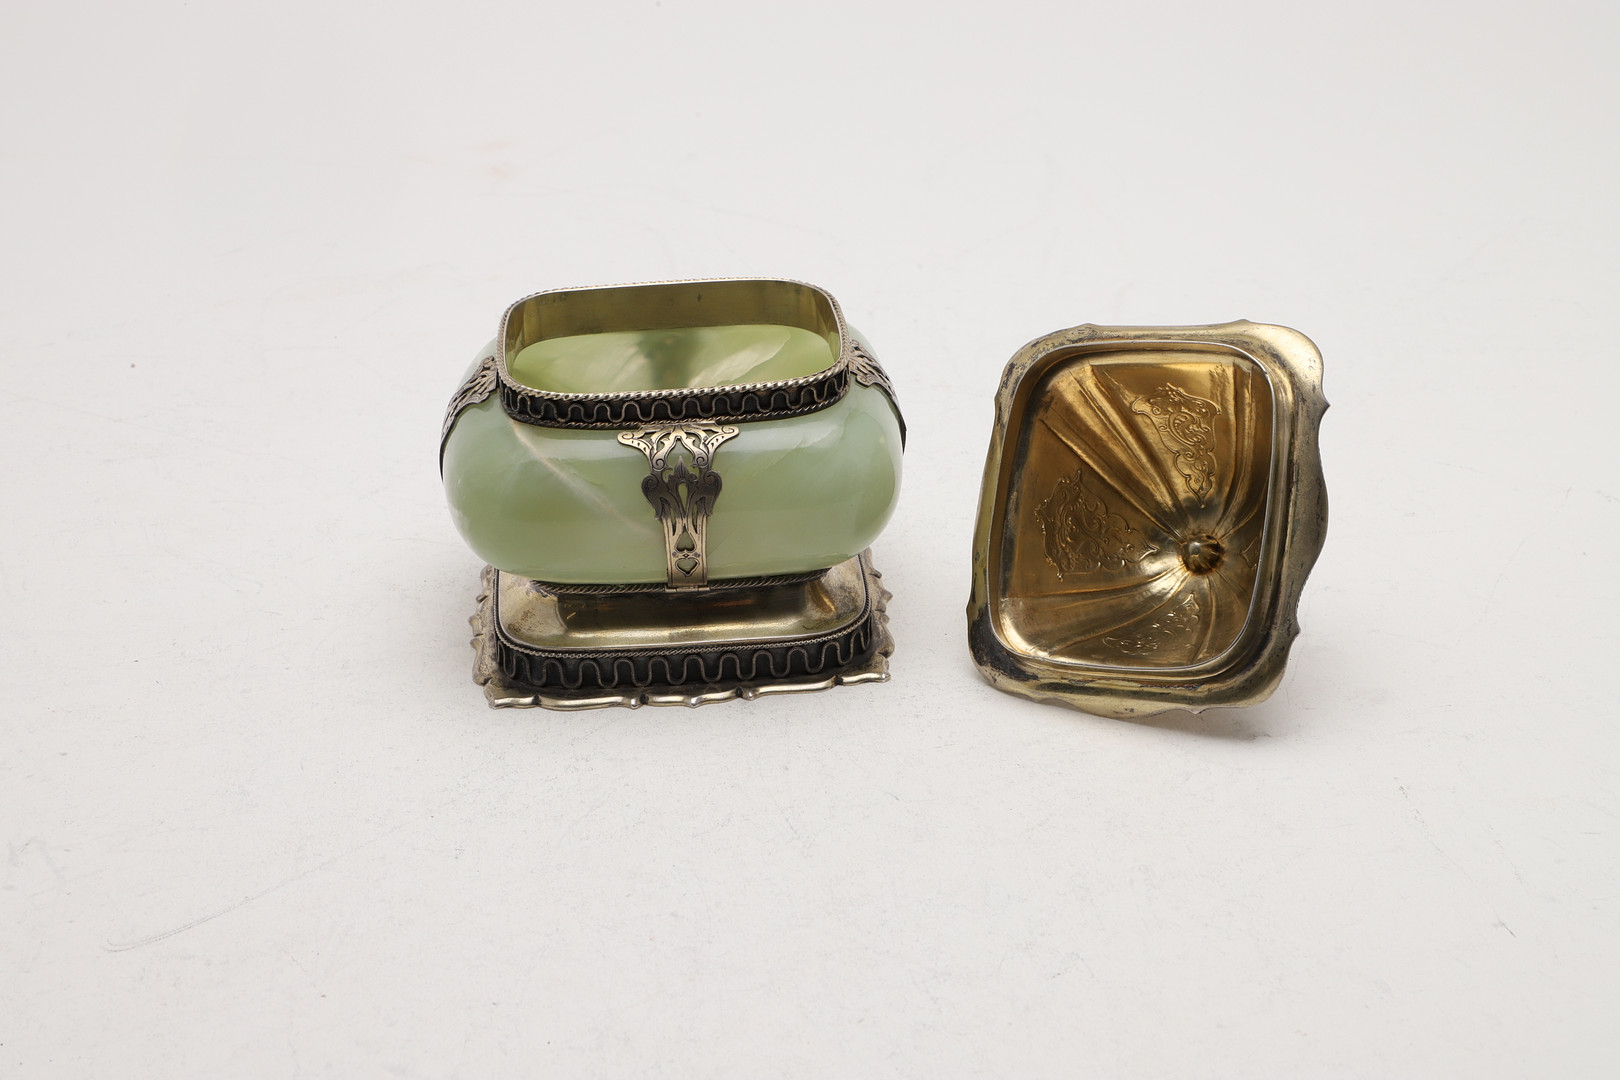 A LATE 19TH/ EARLY 20TH CENTURY GERMAN ONYX MOUNTED PARCEL-GILT BOX & COVER. - Image 5 of 7